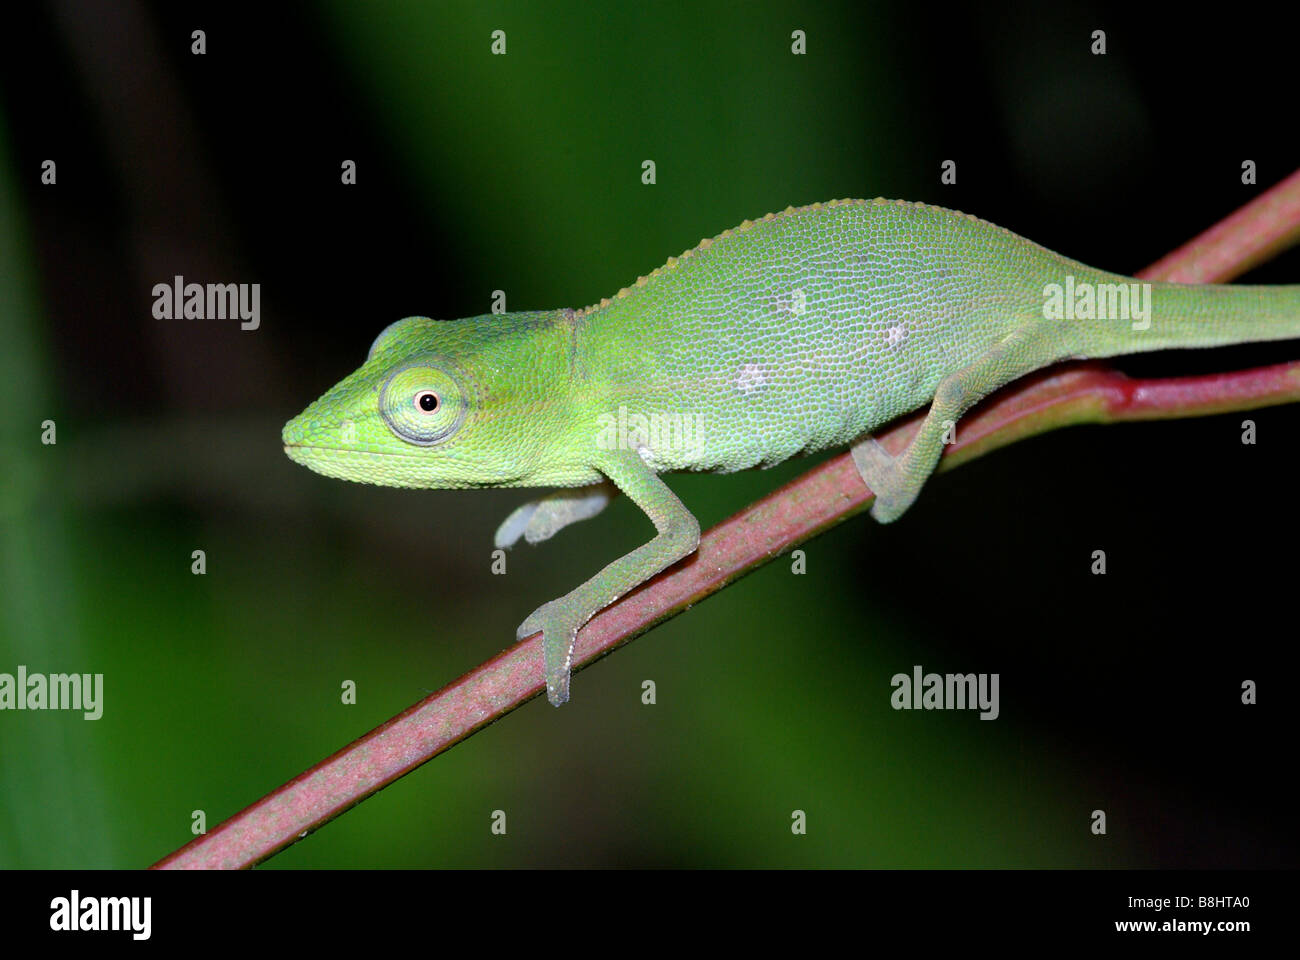 Adult Short-nosed Chameleon on a thin branch at night in Analamazaotra Special Reserve (Perinet), Madagascar. Stock Photo